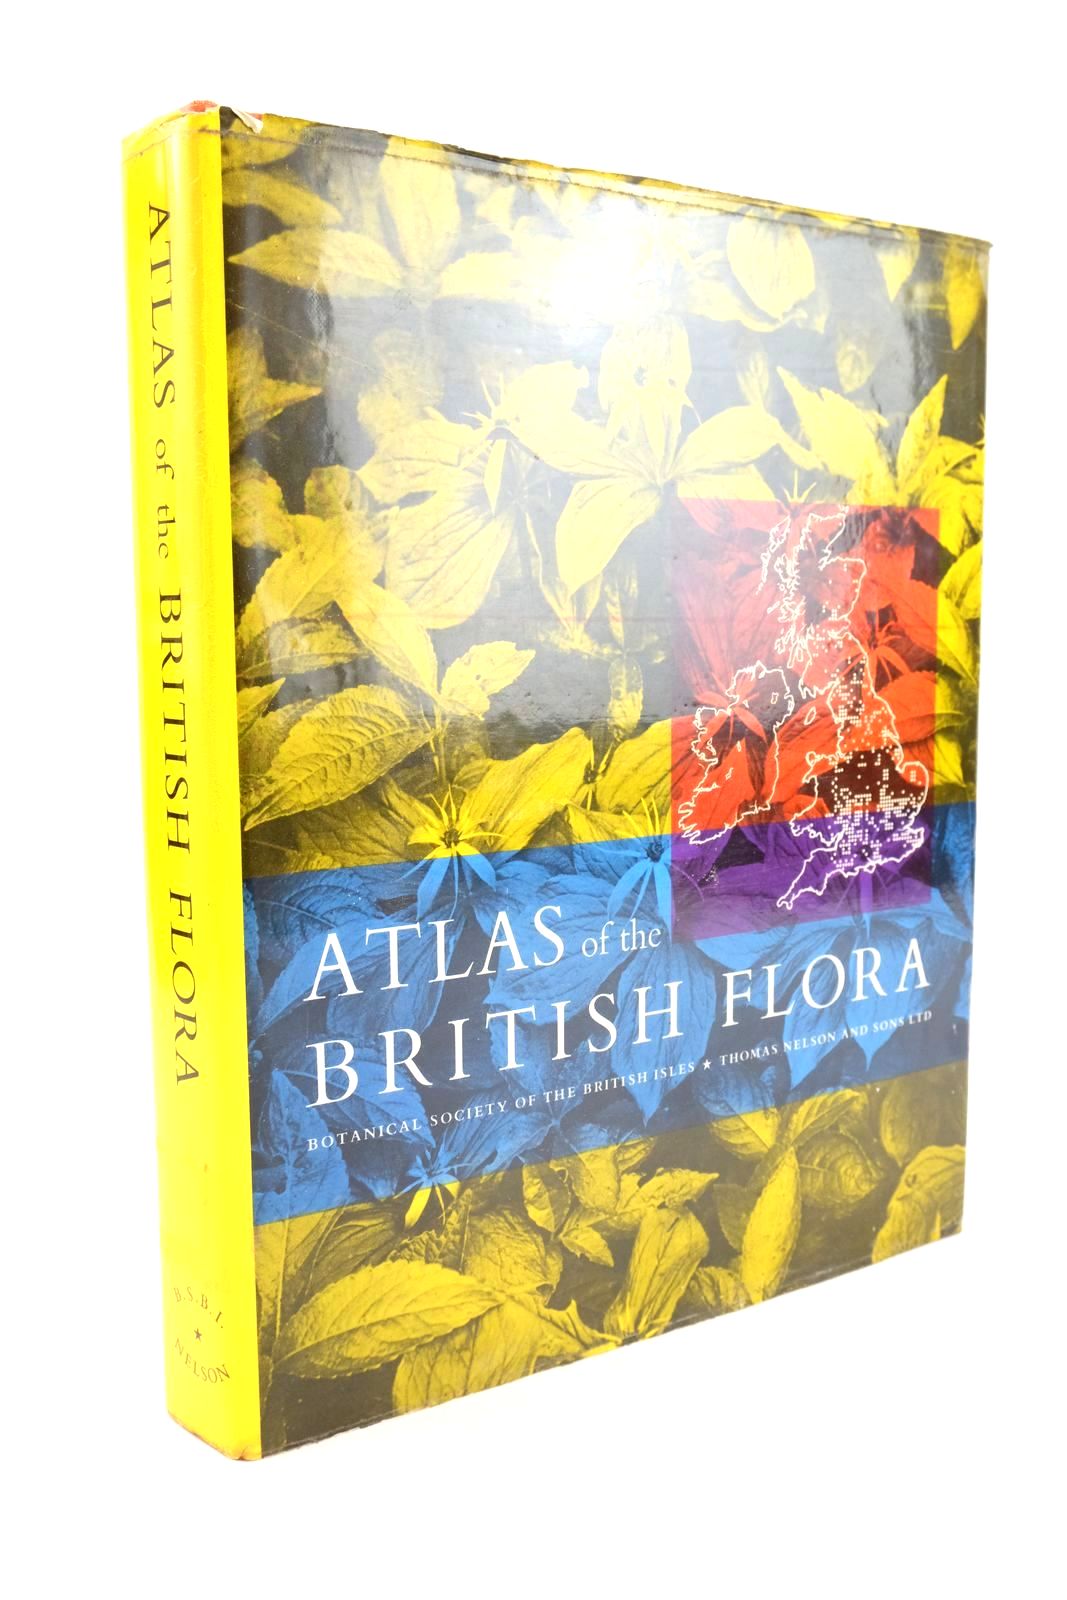 Photo of ATLAS OF THE BRITISH FLORA written by Perring, F.H. Walters, S.M. published by Thomas Nelson and Sons Ltd. (STOCK CODE: 1324731)  for sale by Stella & Rose's Books